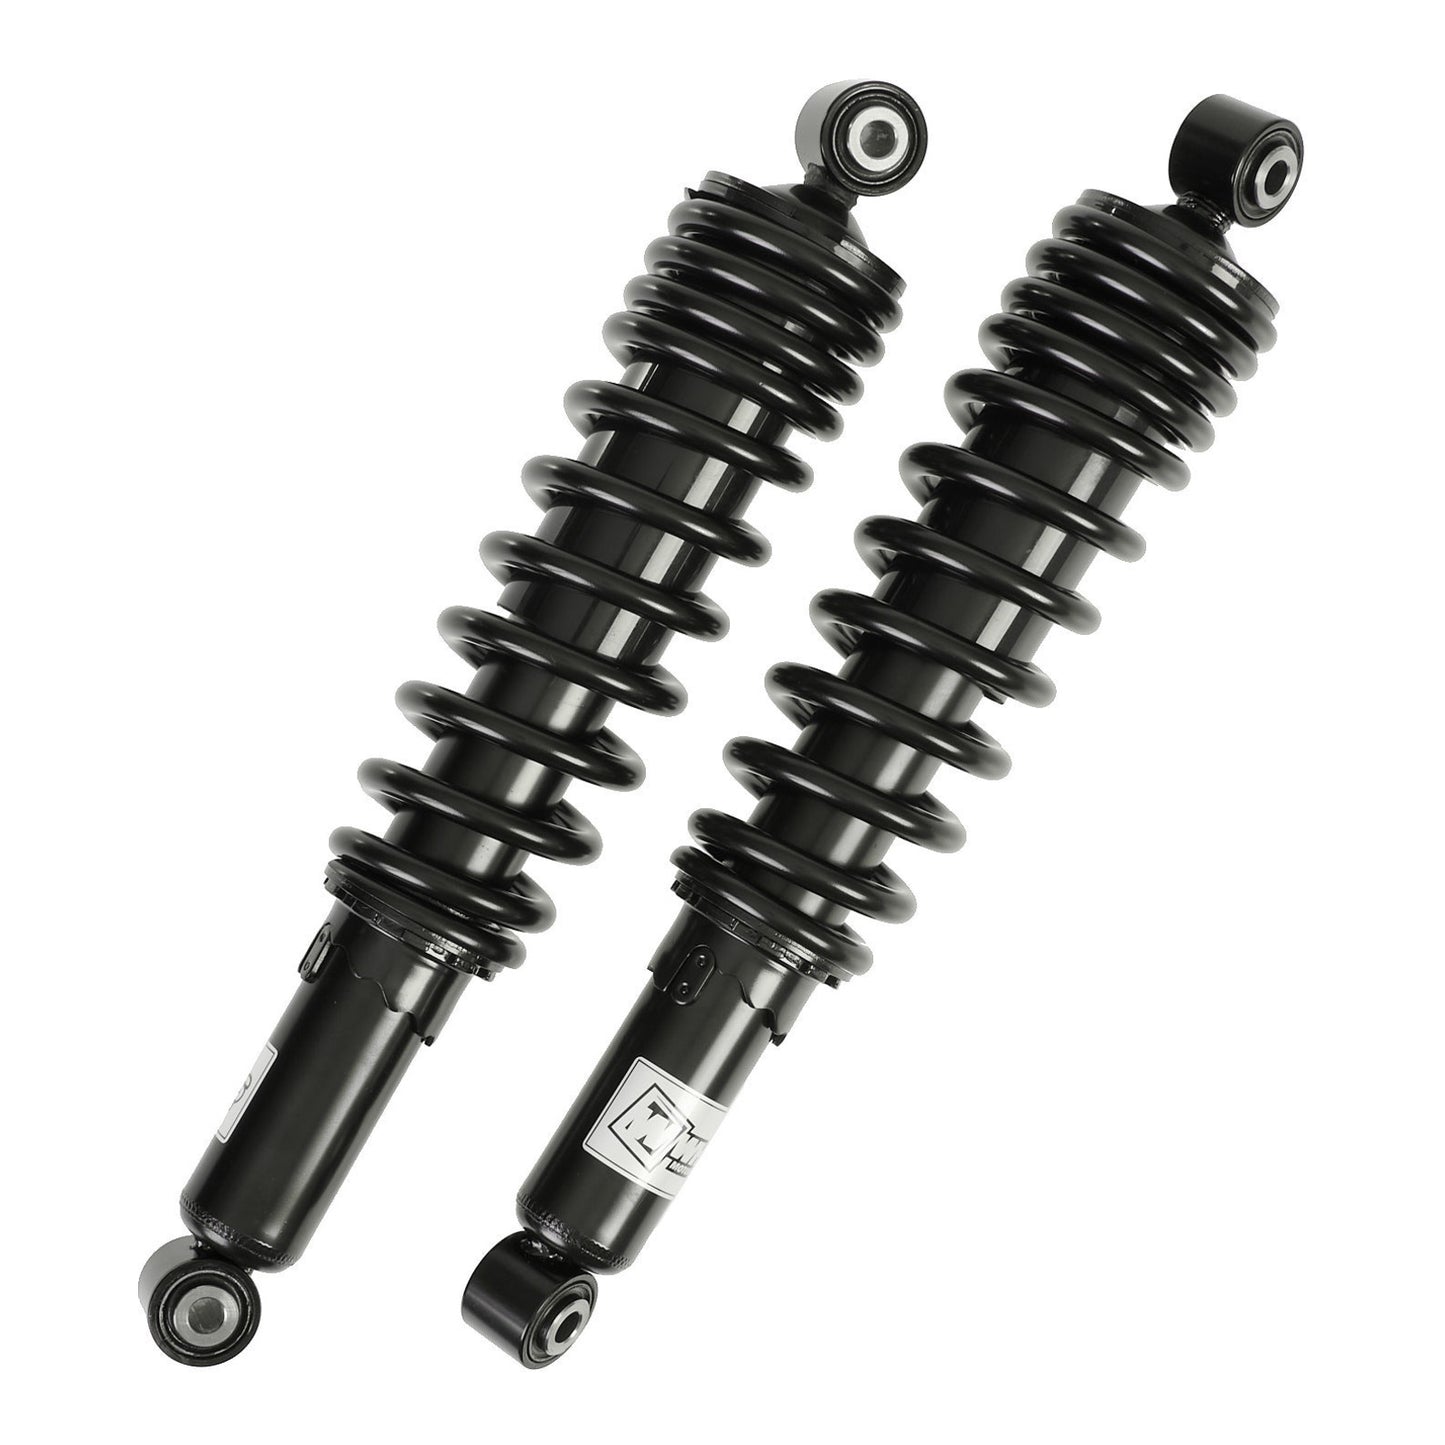 WHITES SHOCK ABSORBERS SUZ LTA700 KING QUAD FRONT - PAIR